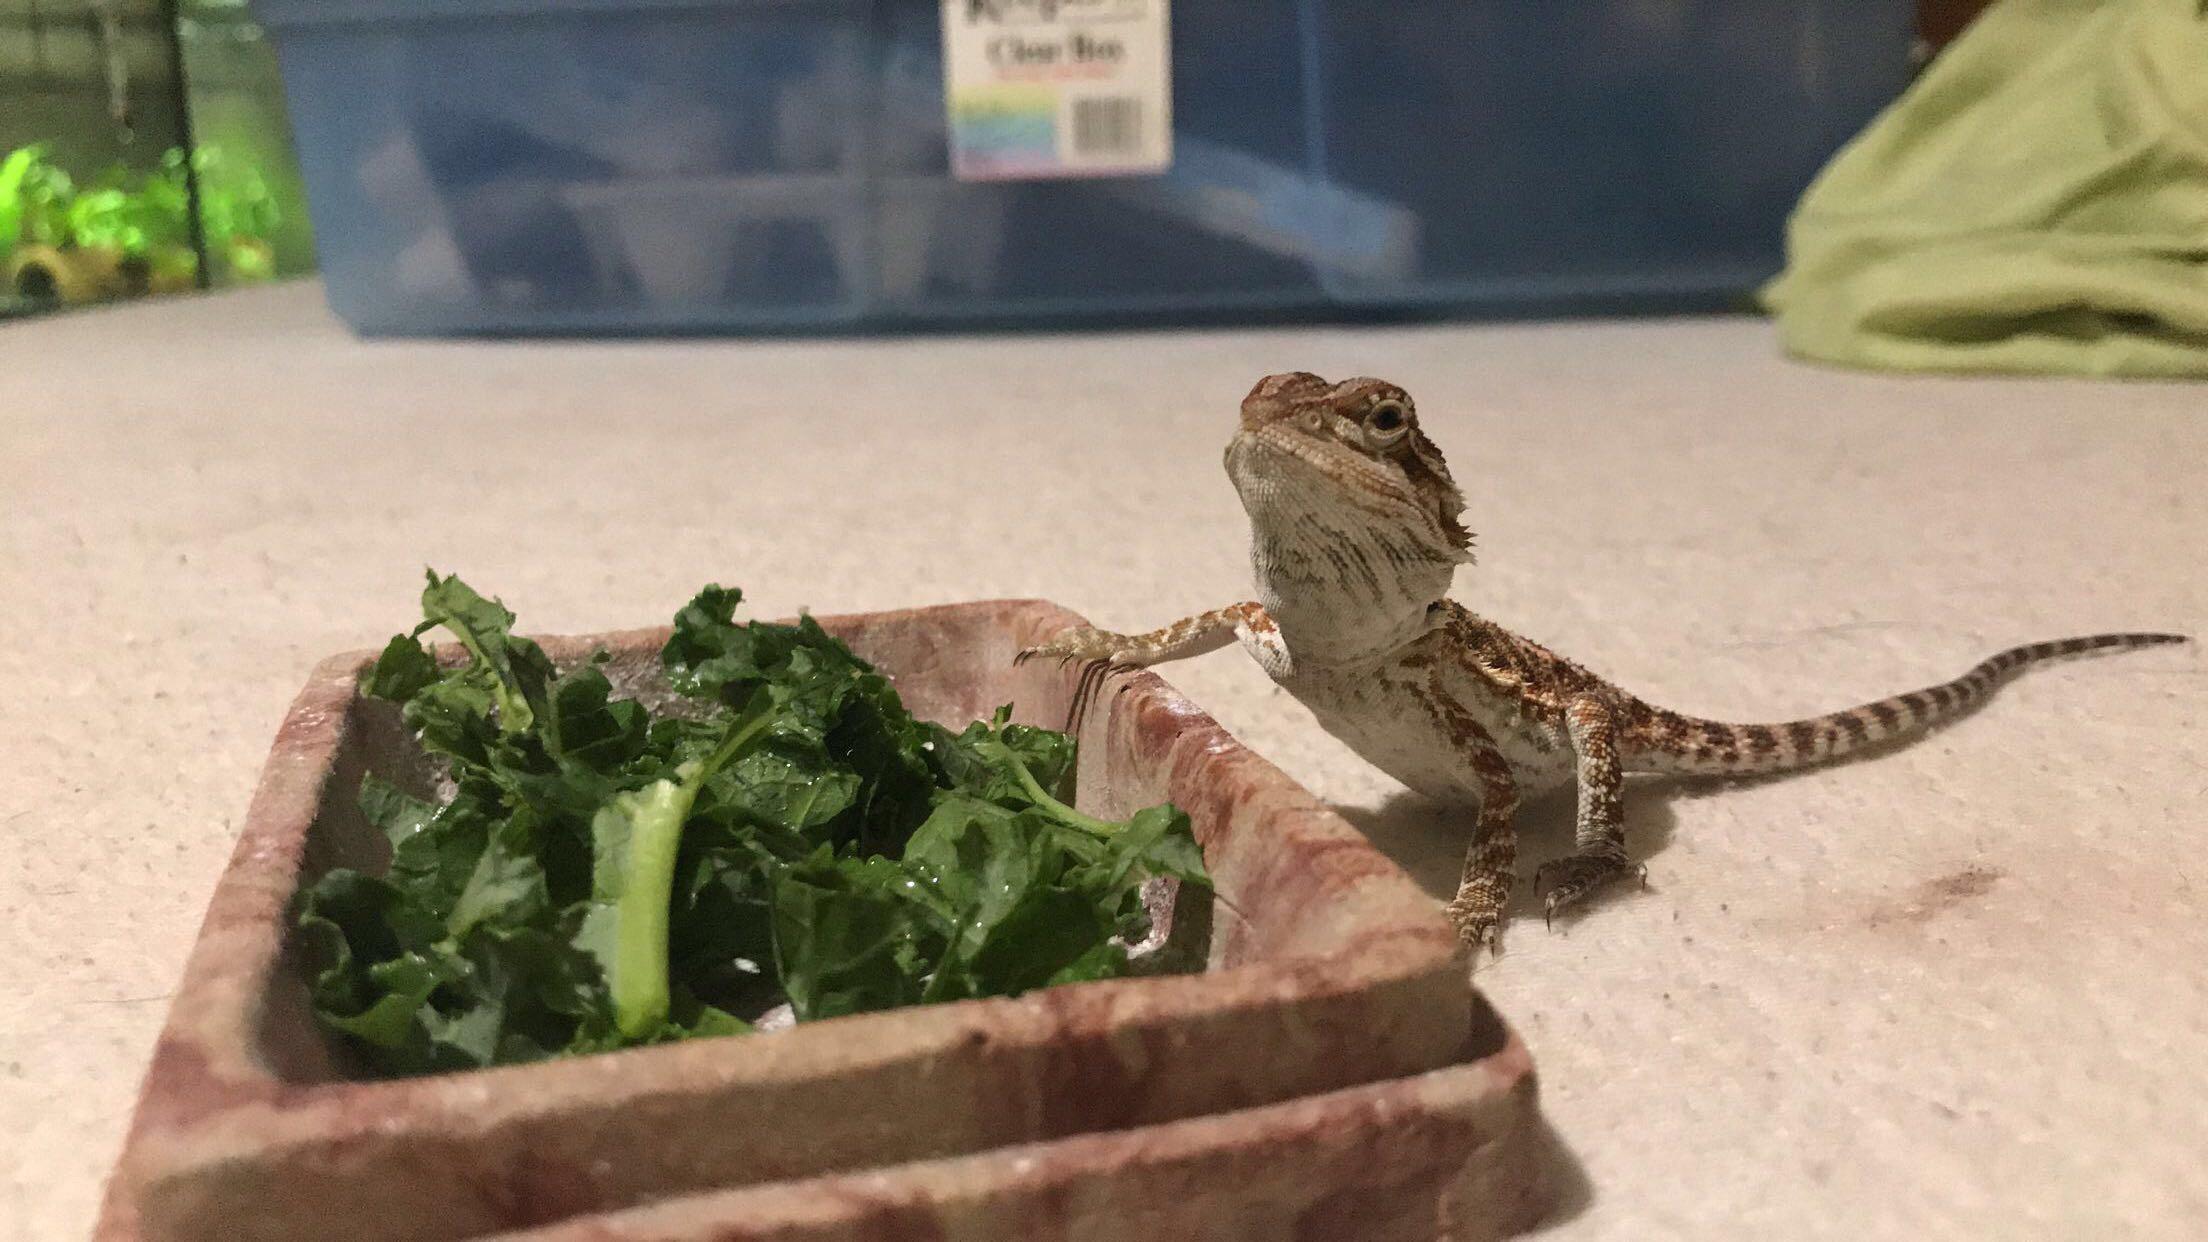 Can Bearded Dragons Eat Kale 2021 Good for Pet Beardies to Have? 